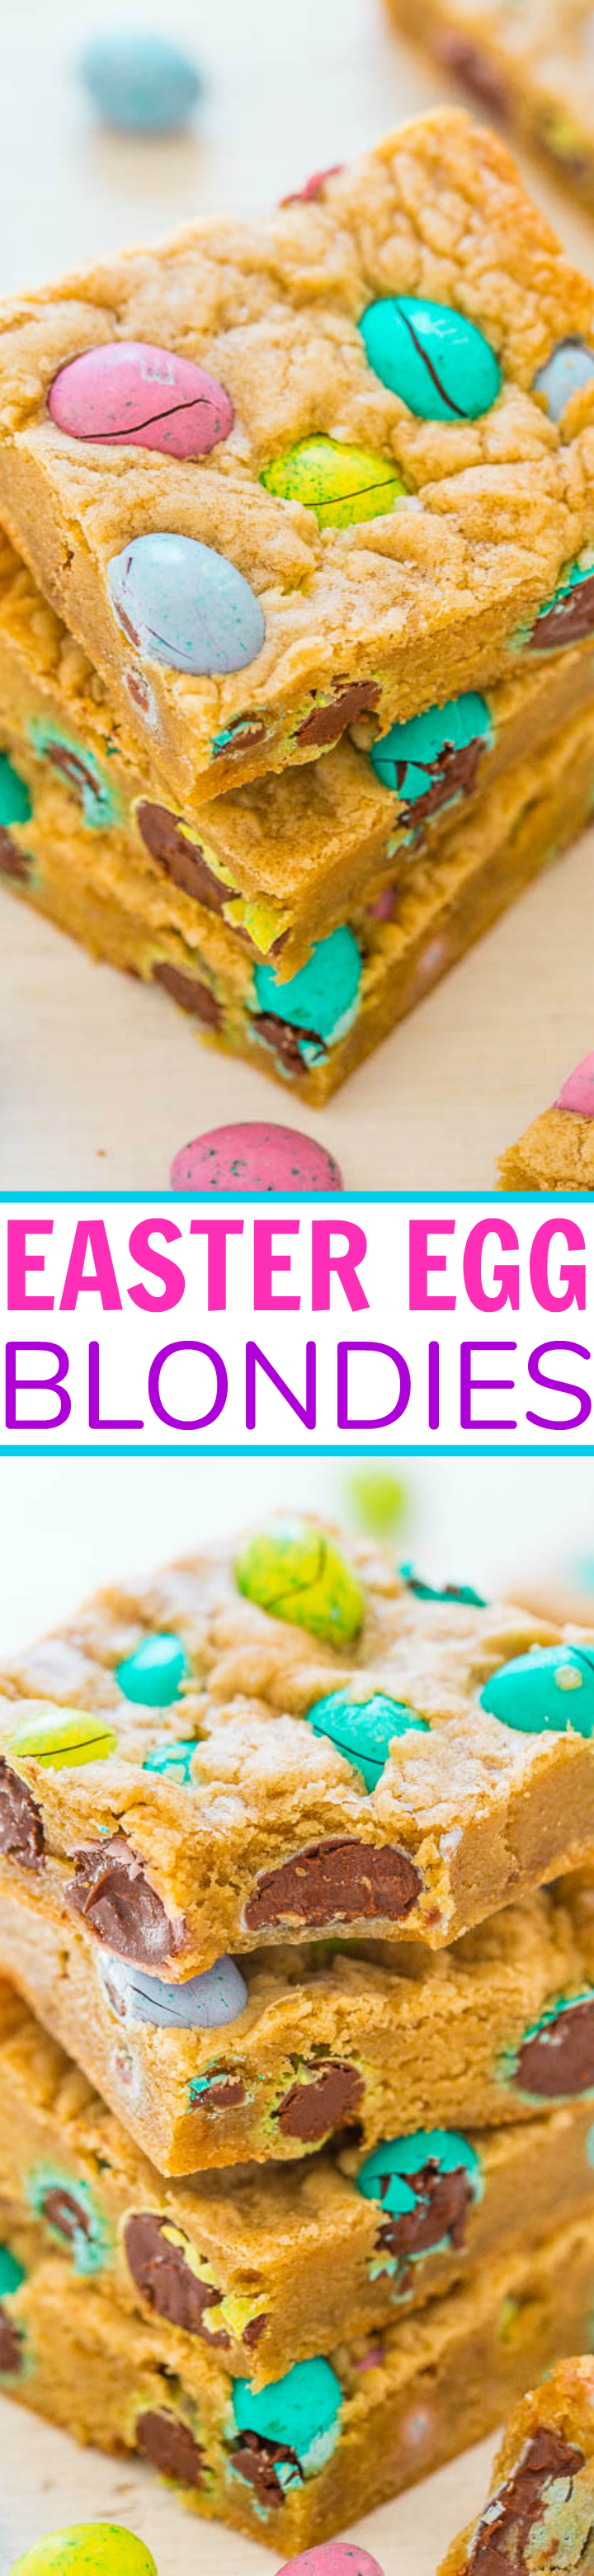 Easter Egg Blondies - Fast, EASY, super soft, and loaded with chocolate M&M Eggs galore!! Definitely my favorite type of Easter eggs! SAVE this recipe for your leftover Easter candy!!